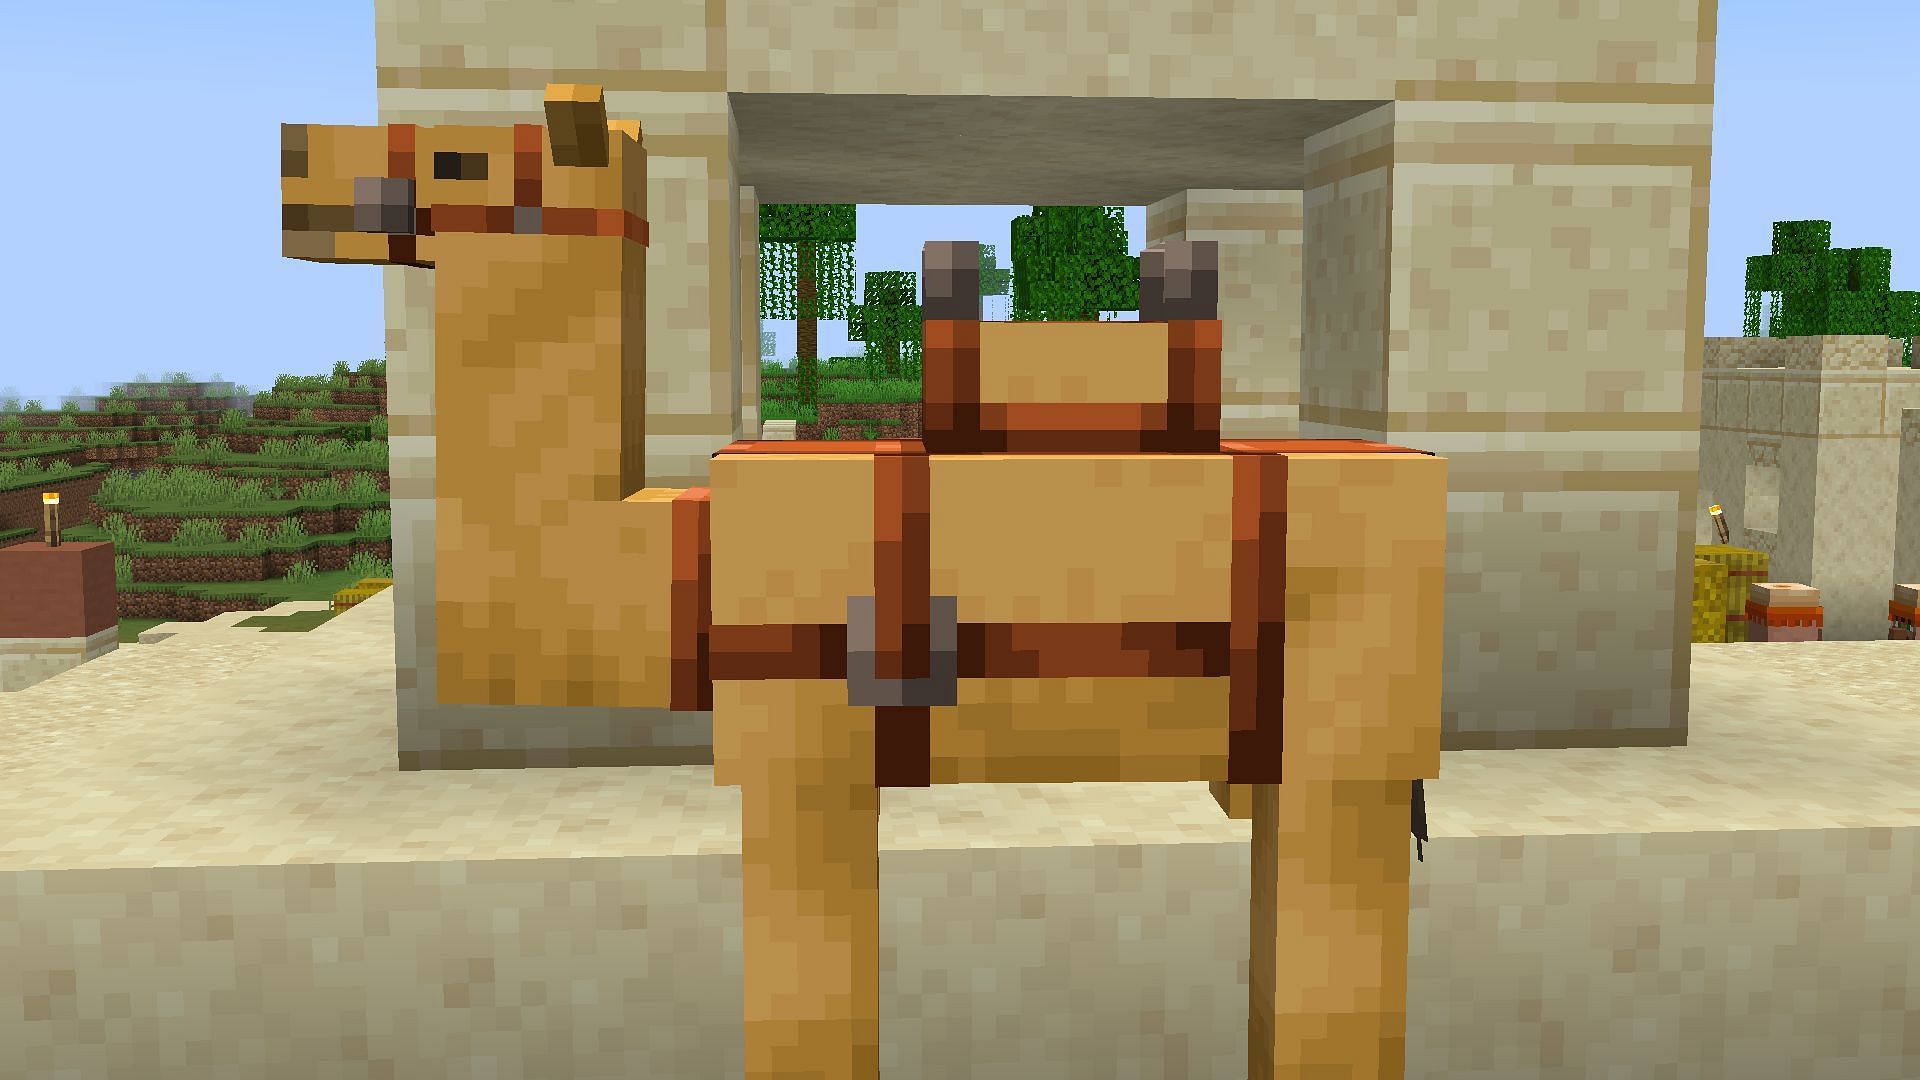 Minecraft's new camels are already here in a new beta build